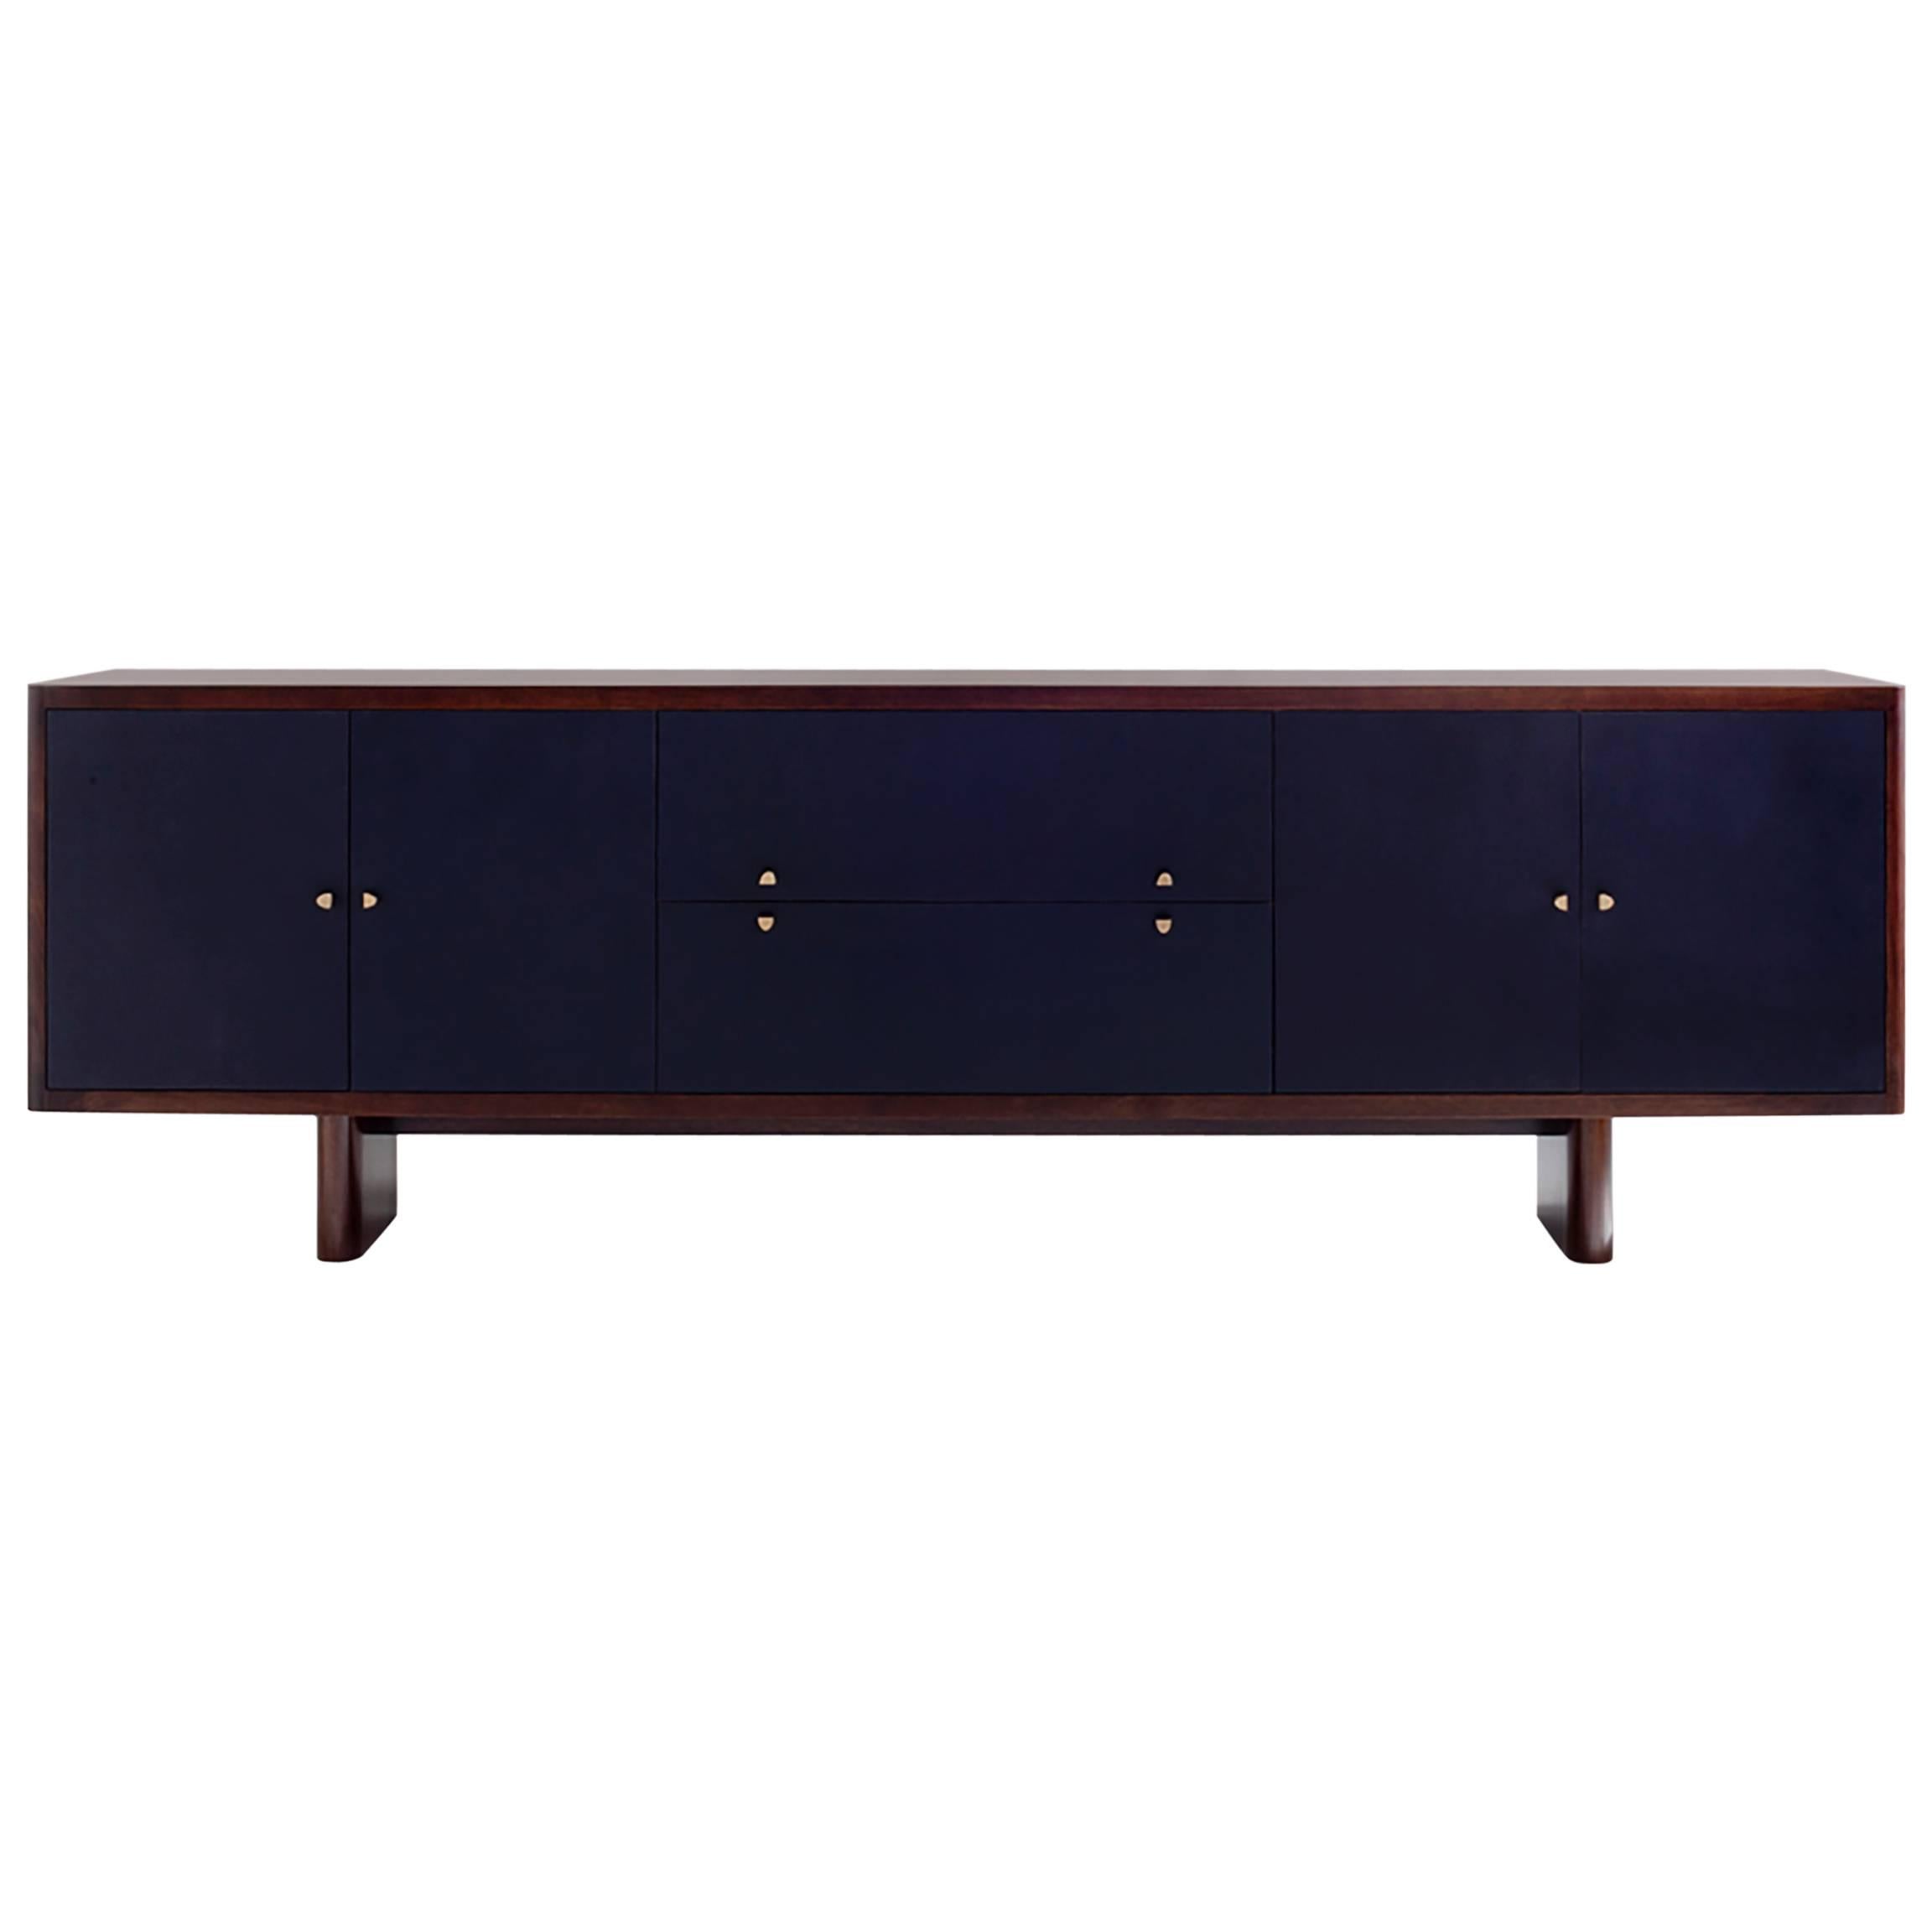 96" Turner Sideboard, Solid Wood and Leather im Angebot